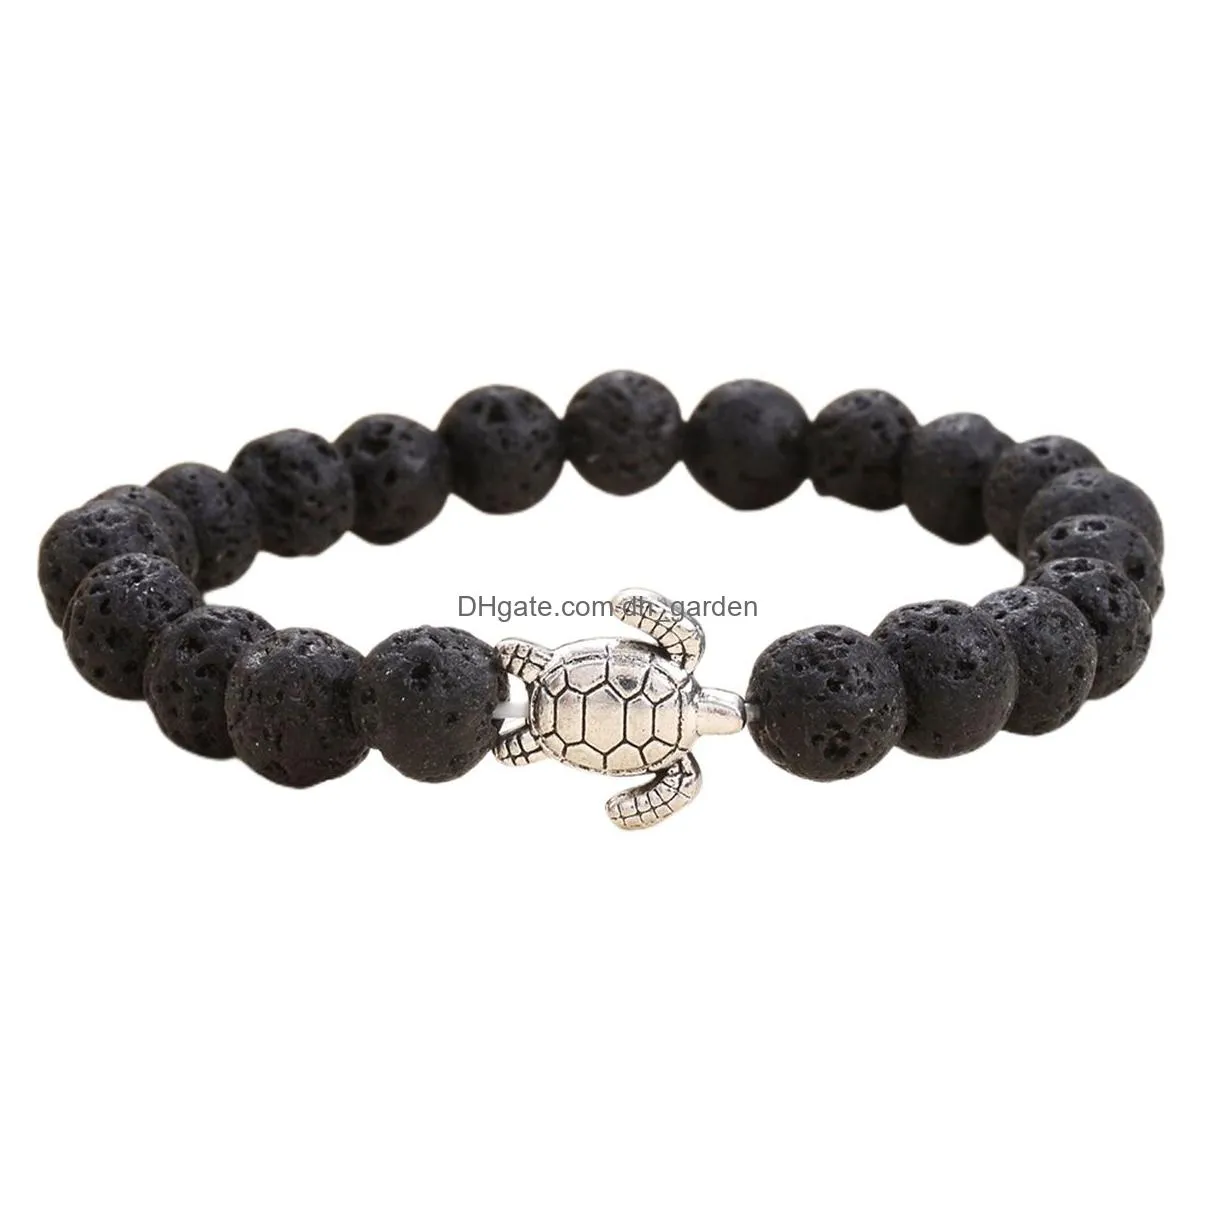 turtle shape alloy model with gemstone beads bracelet healing natural crystal stone beads bracelet for men and women